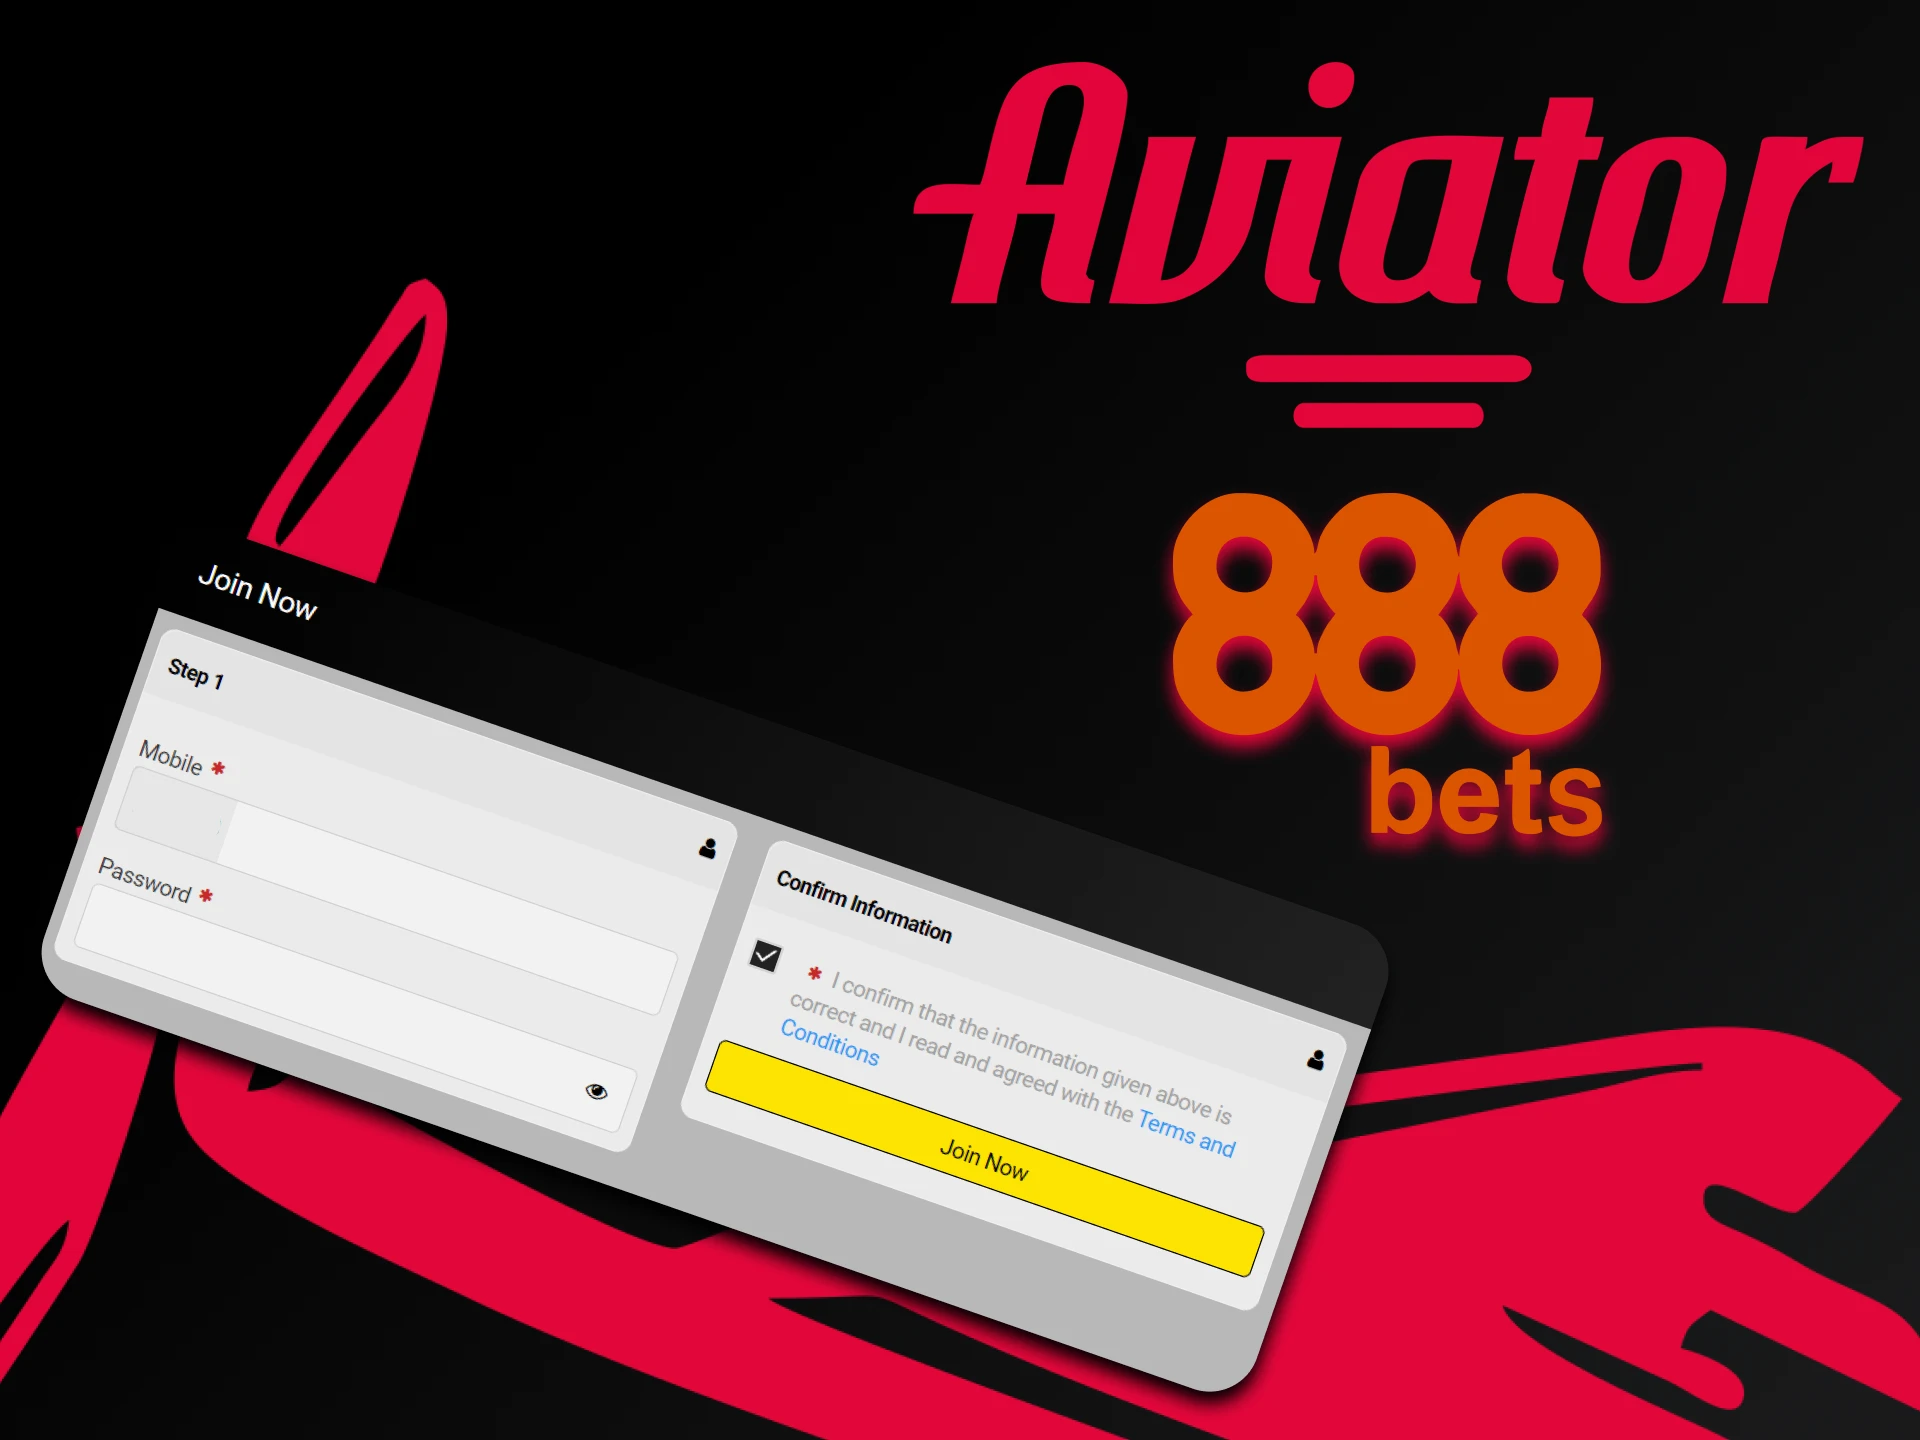 Go through the registration process on 888bet to play Aviator.